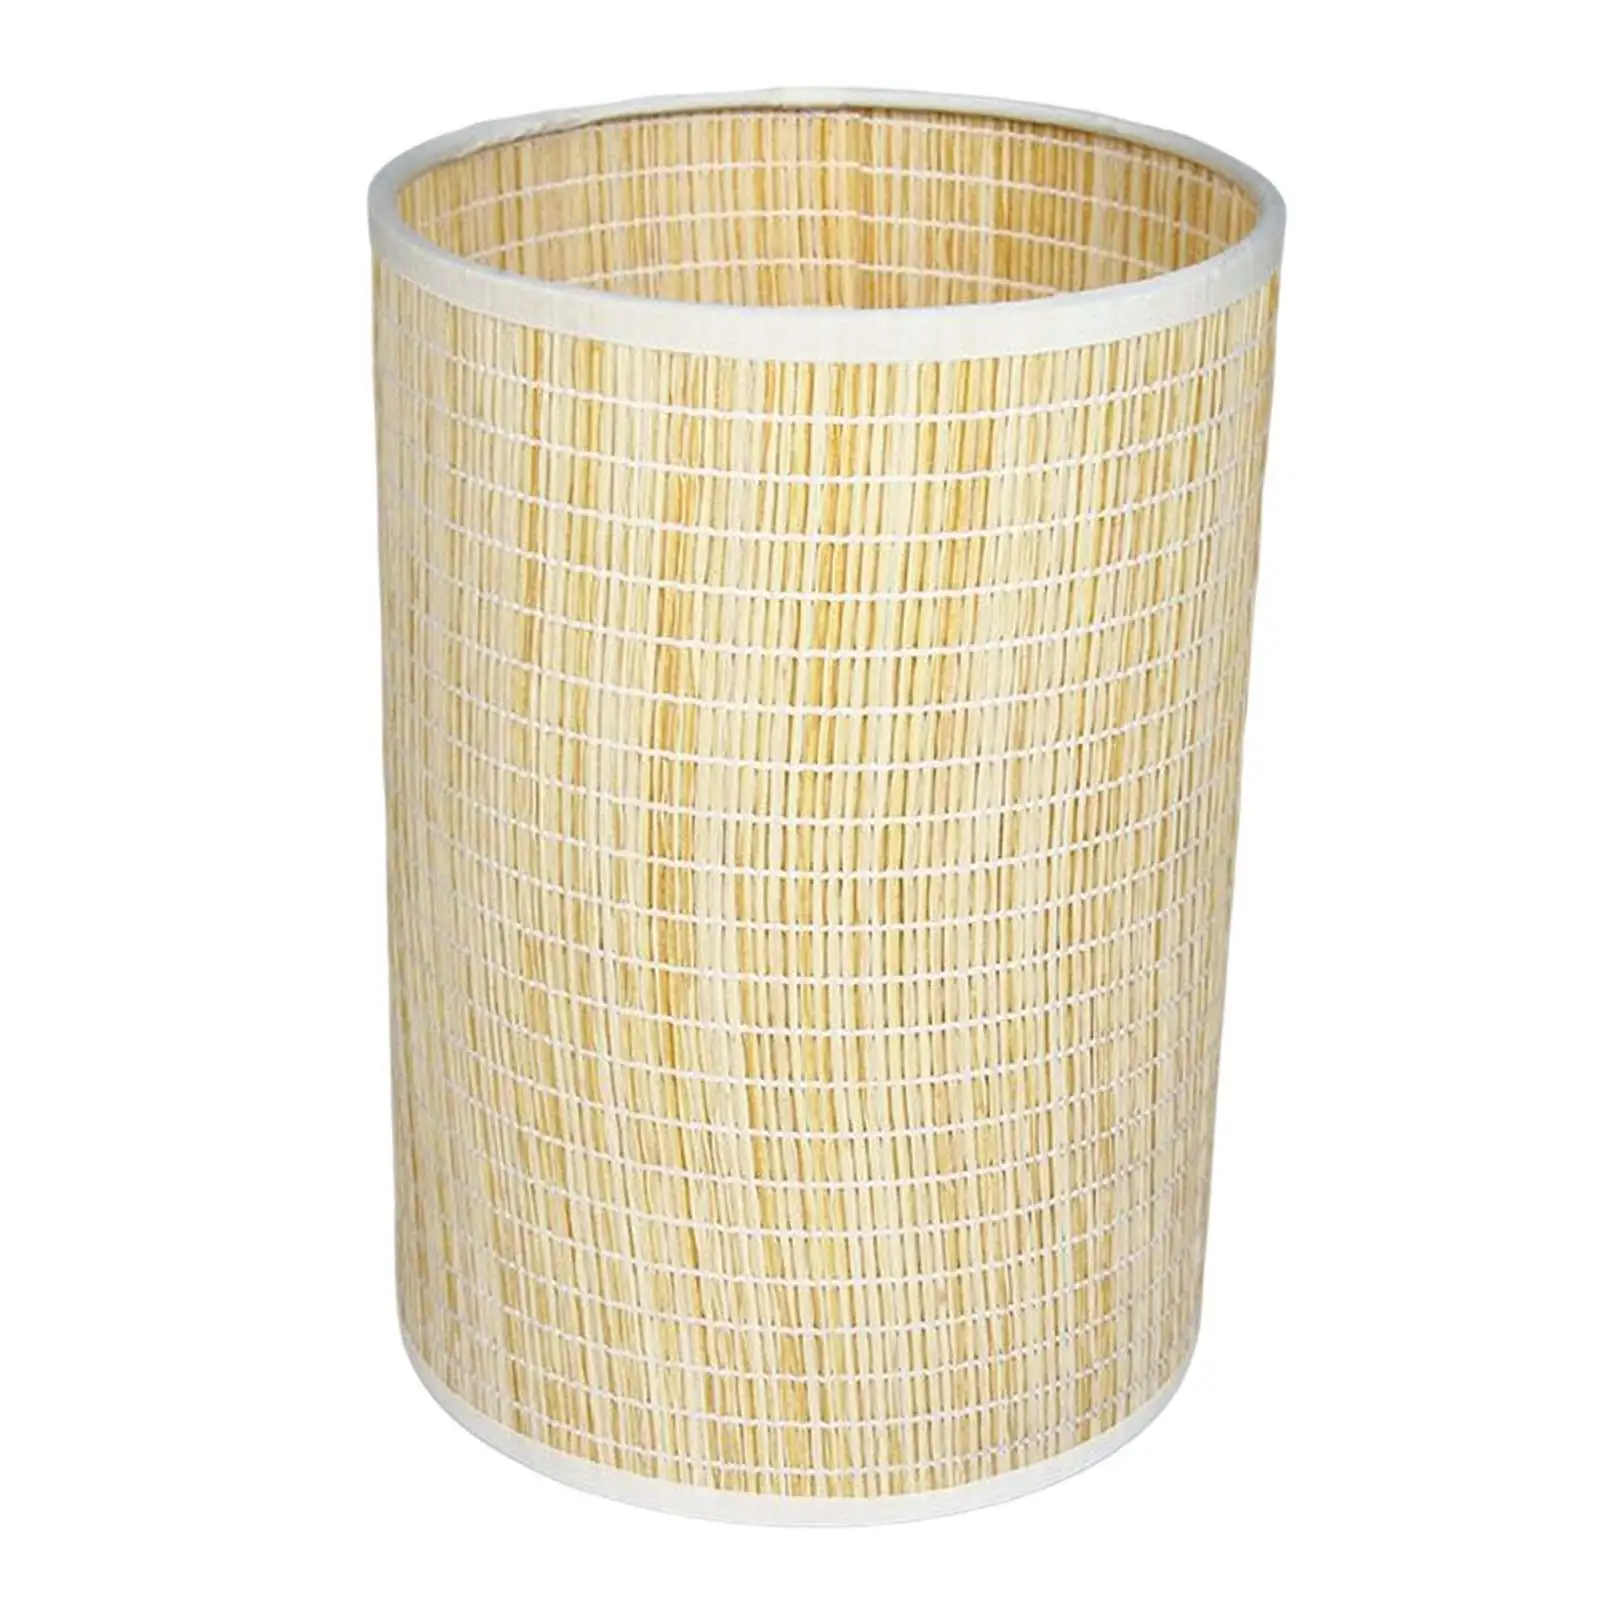 Classic Rattan Lamp Shade Ceiling Light Cover Chandelier Decorative Hanging Lampshade for Living Room Bedroom Home Dorm Decor